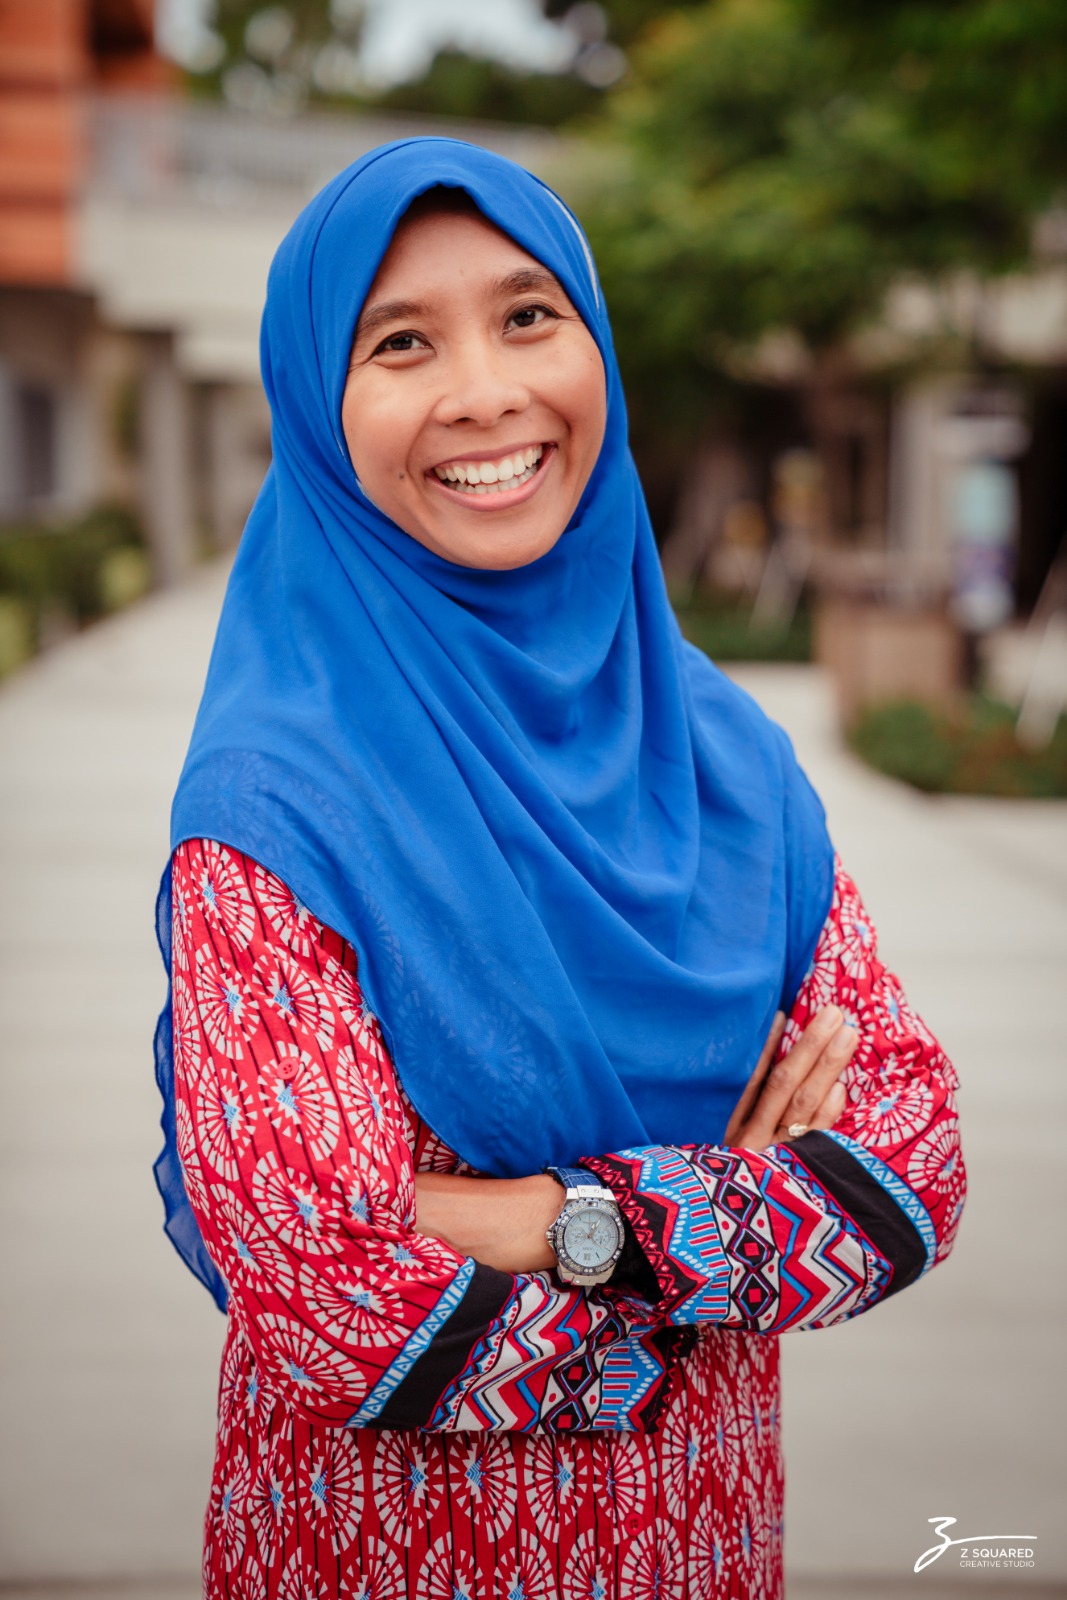 Dr Izdihar Jamil, Ph.D. is a Business Coach and the #1 International Bestselling Author of “Yes I Can!”. She has been featured in international media such as FOX TV and TED Ed.